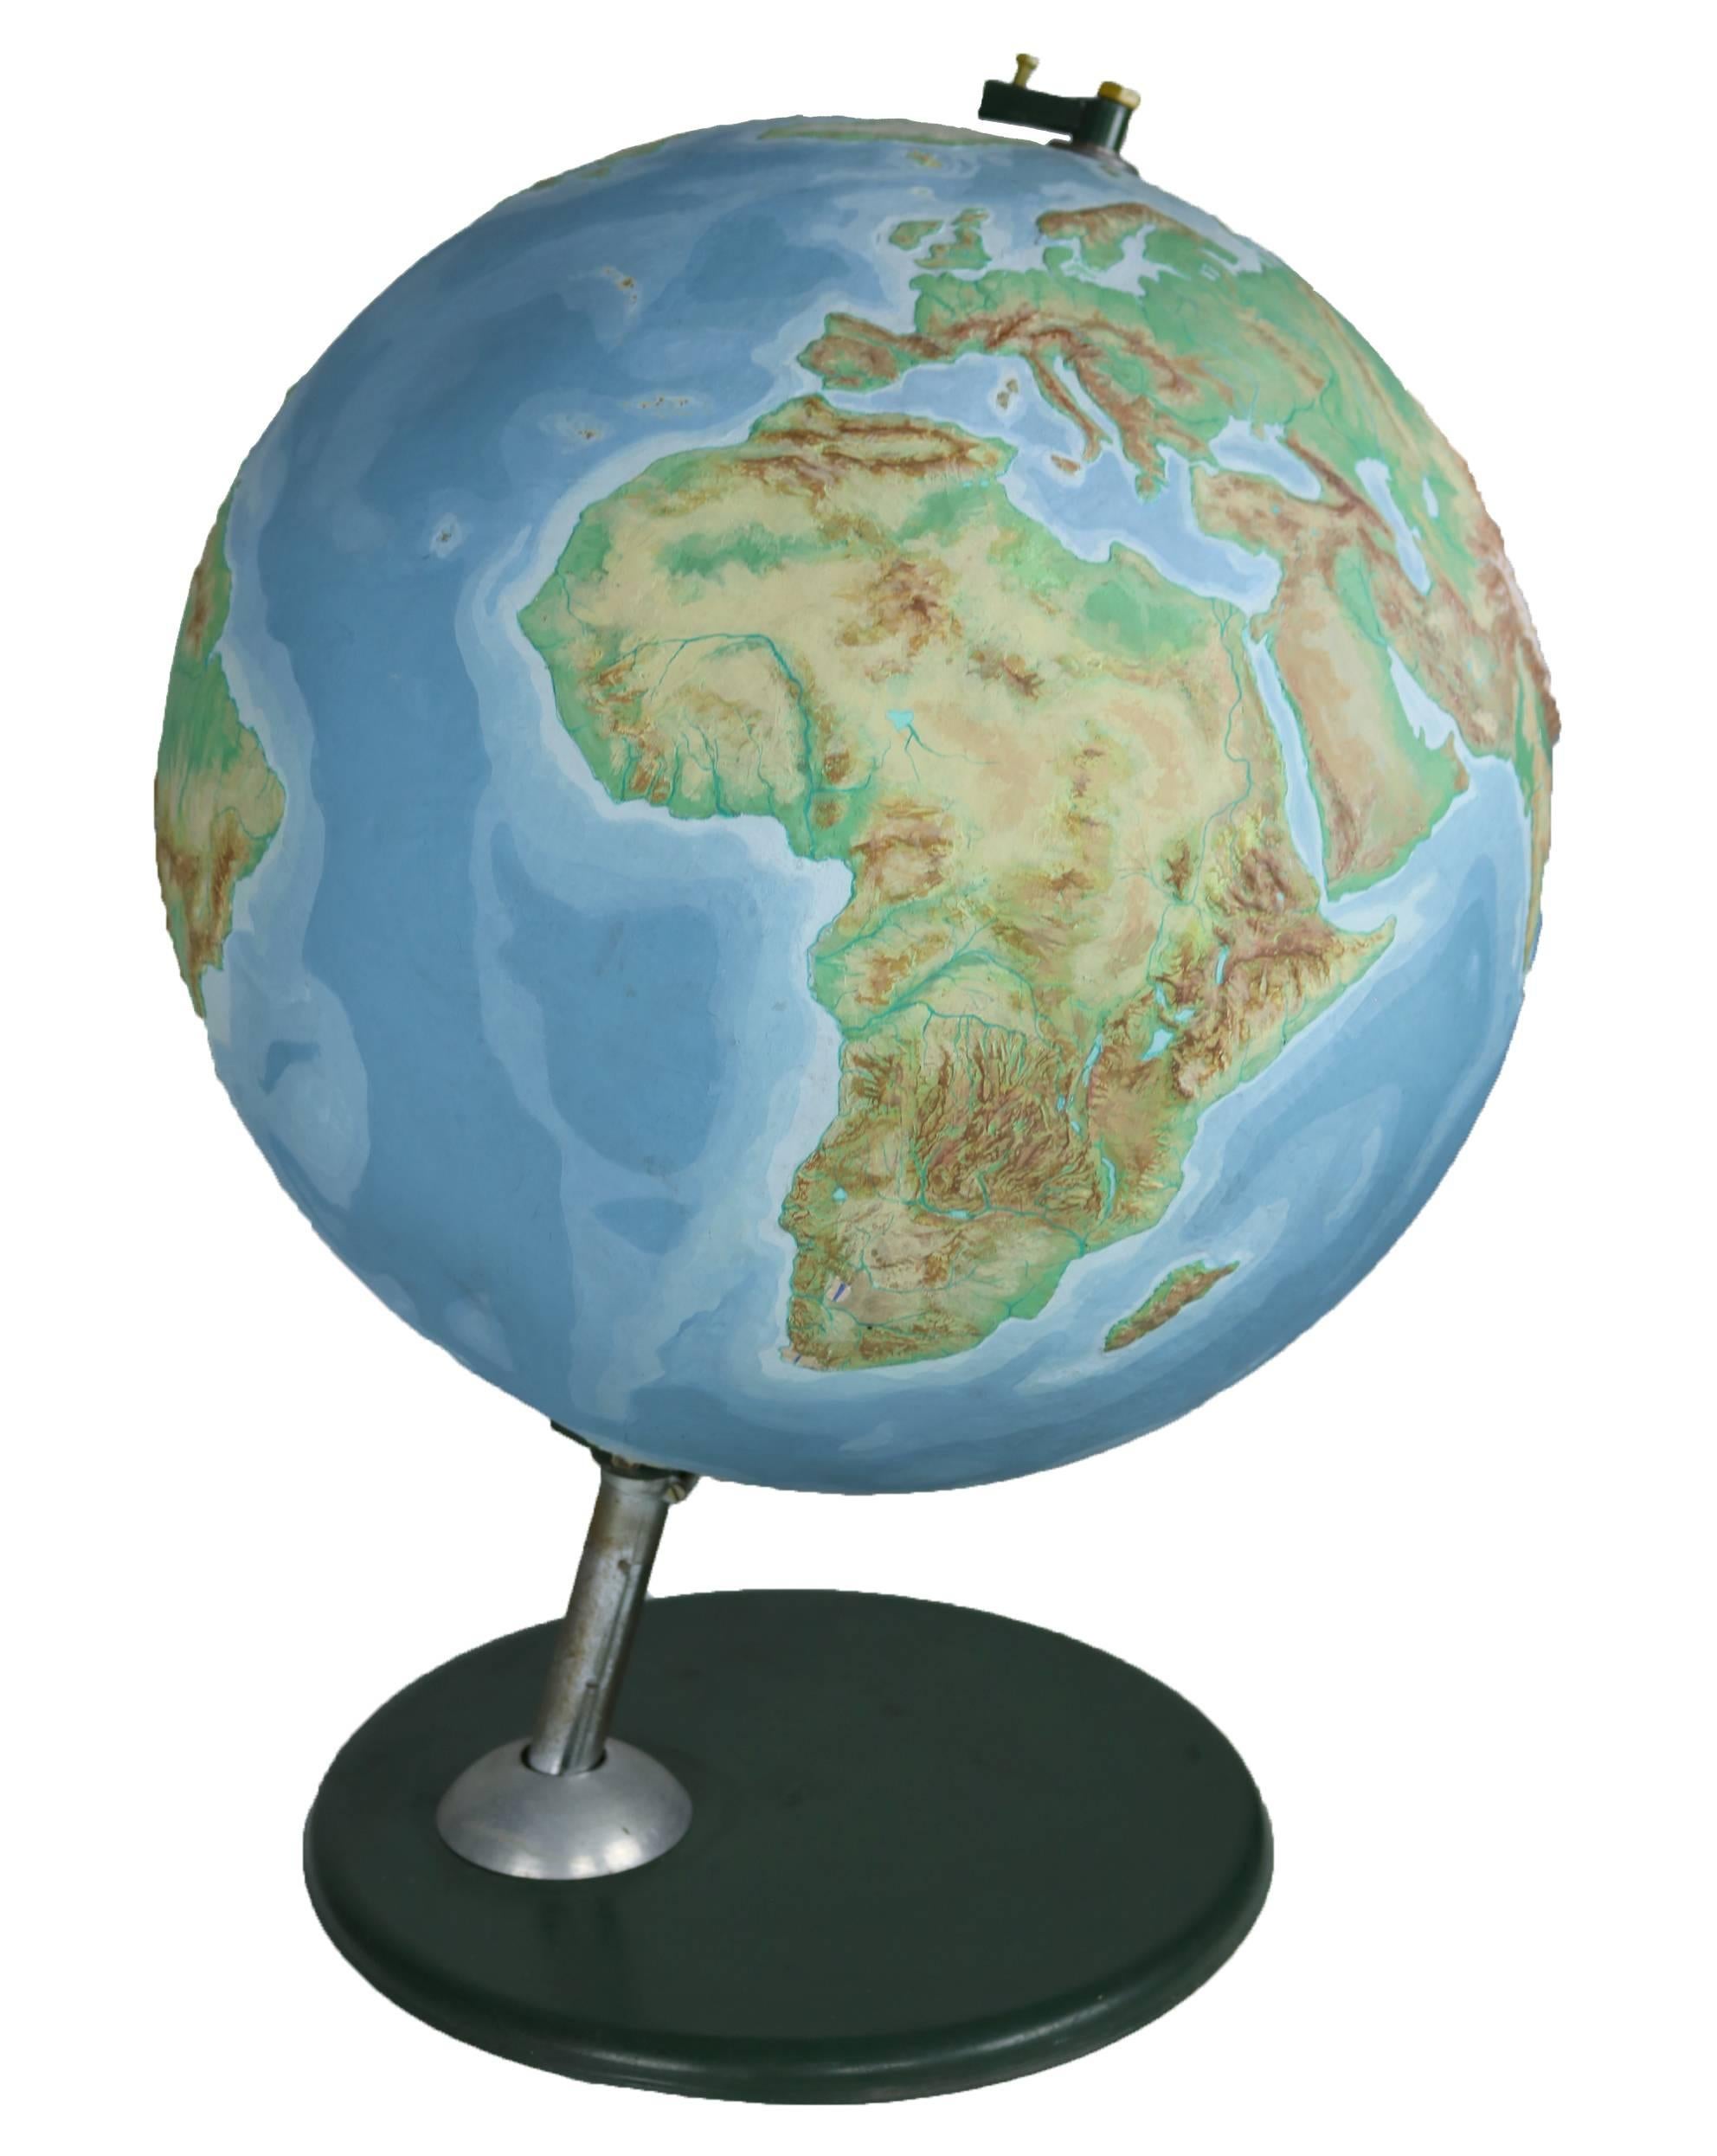 Large Midcentury Terestrial 3D globe. This undedicated globe showing the contours of the Earth on a carton papier globe.